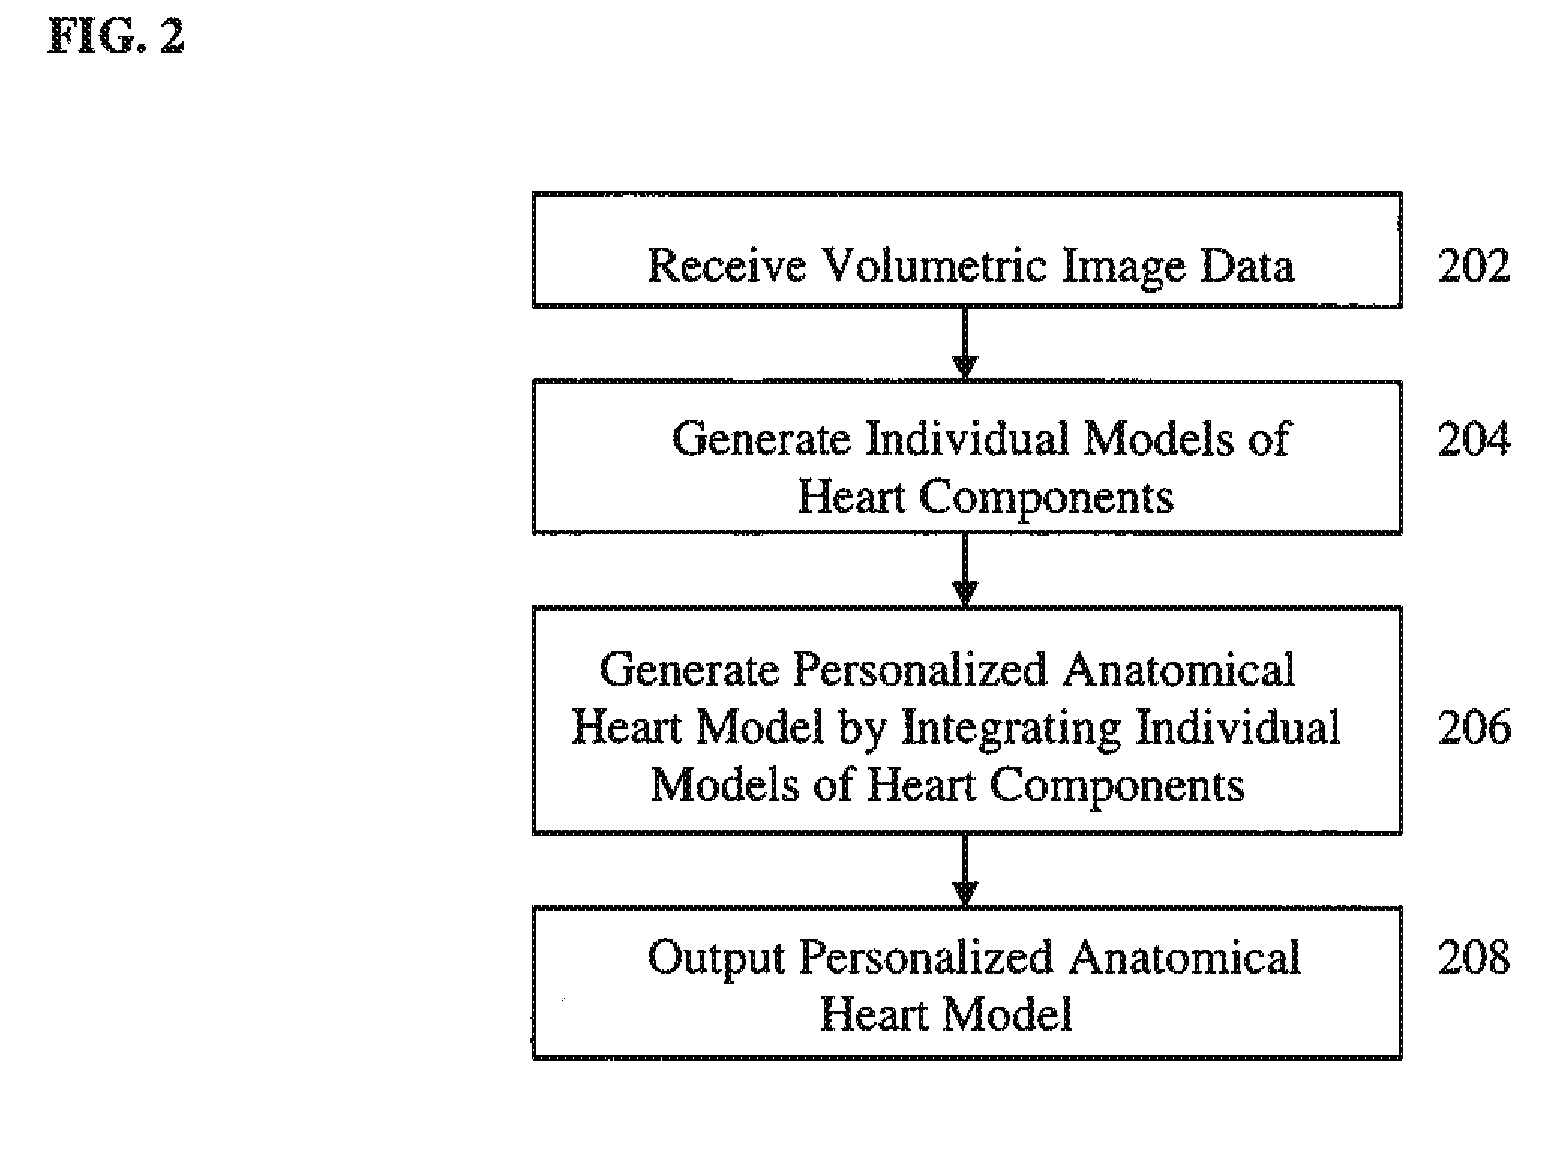 Method and System for Generating a Personalized Anatomical Heart Model